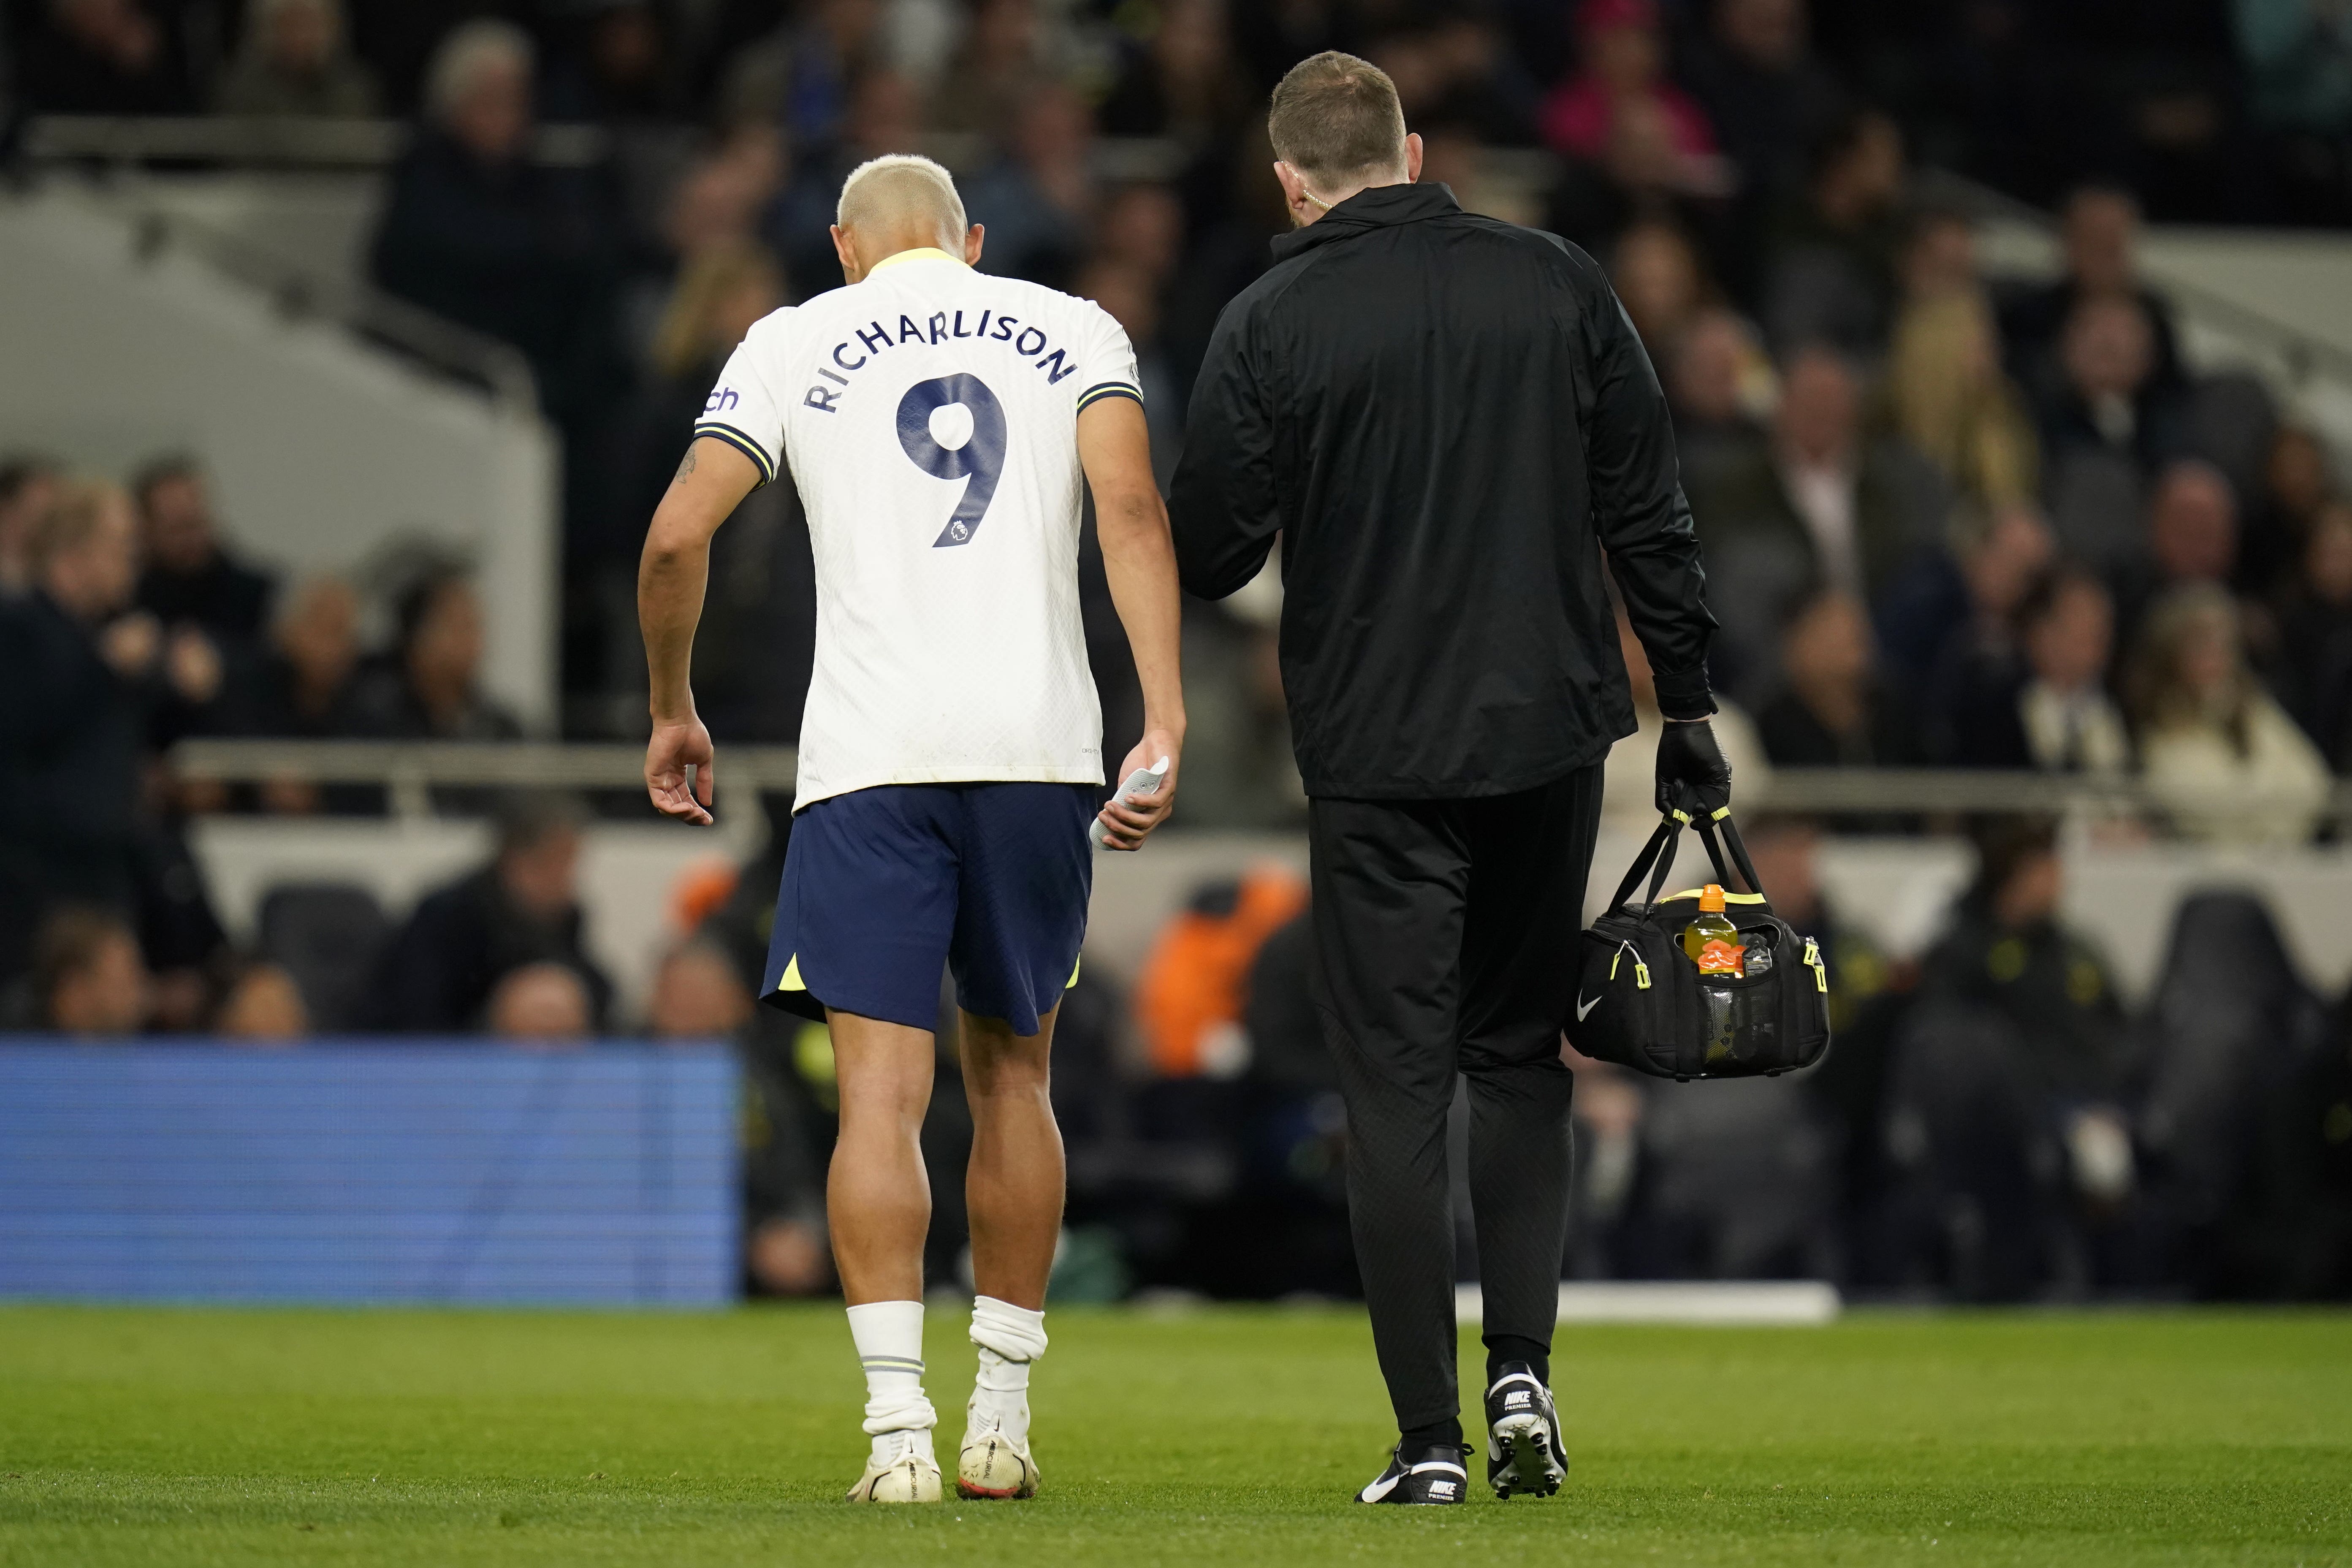 Richarlison was forced off during Tottenham’s 2-0 win over Everton with a calf injury (Andrew Matthews/PA)